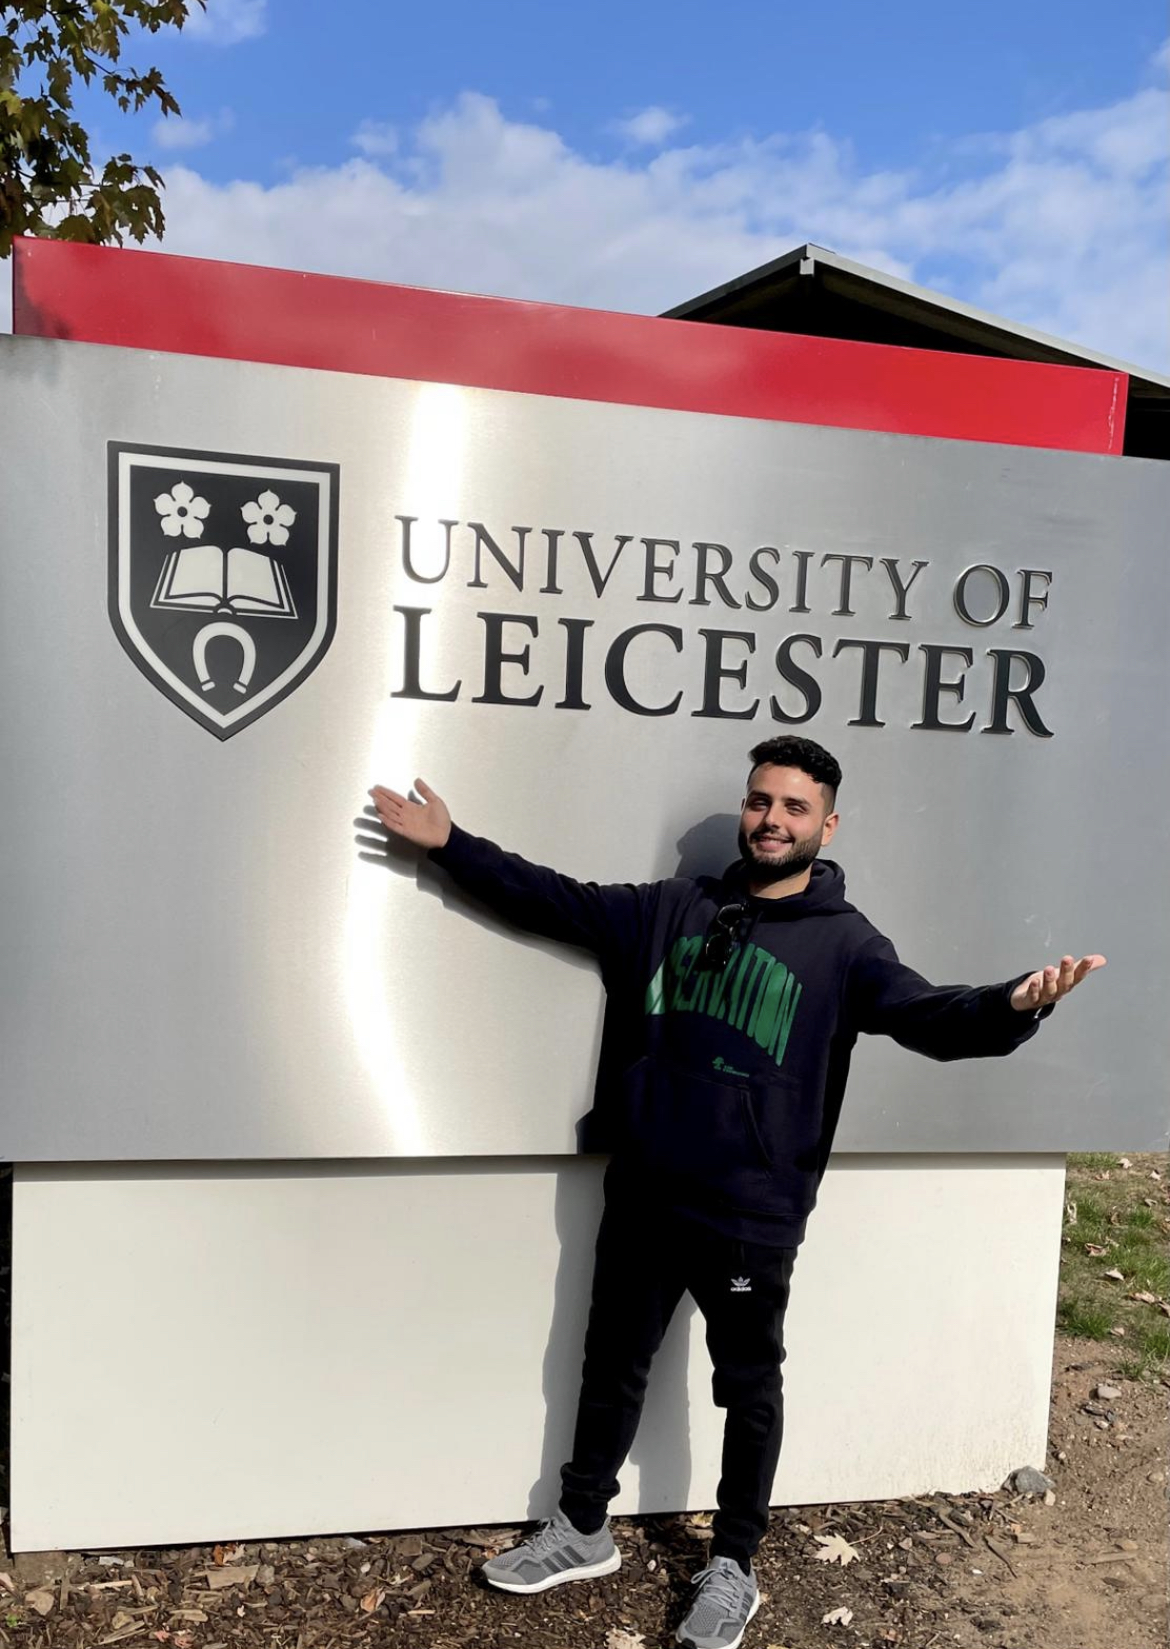 Study Law in the UK - Across the Pond - University of Leicester